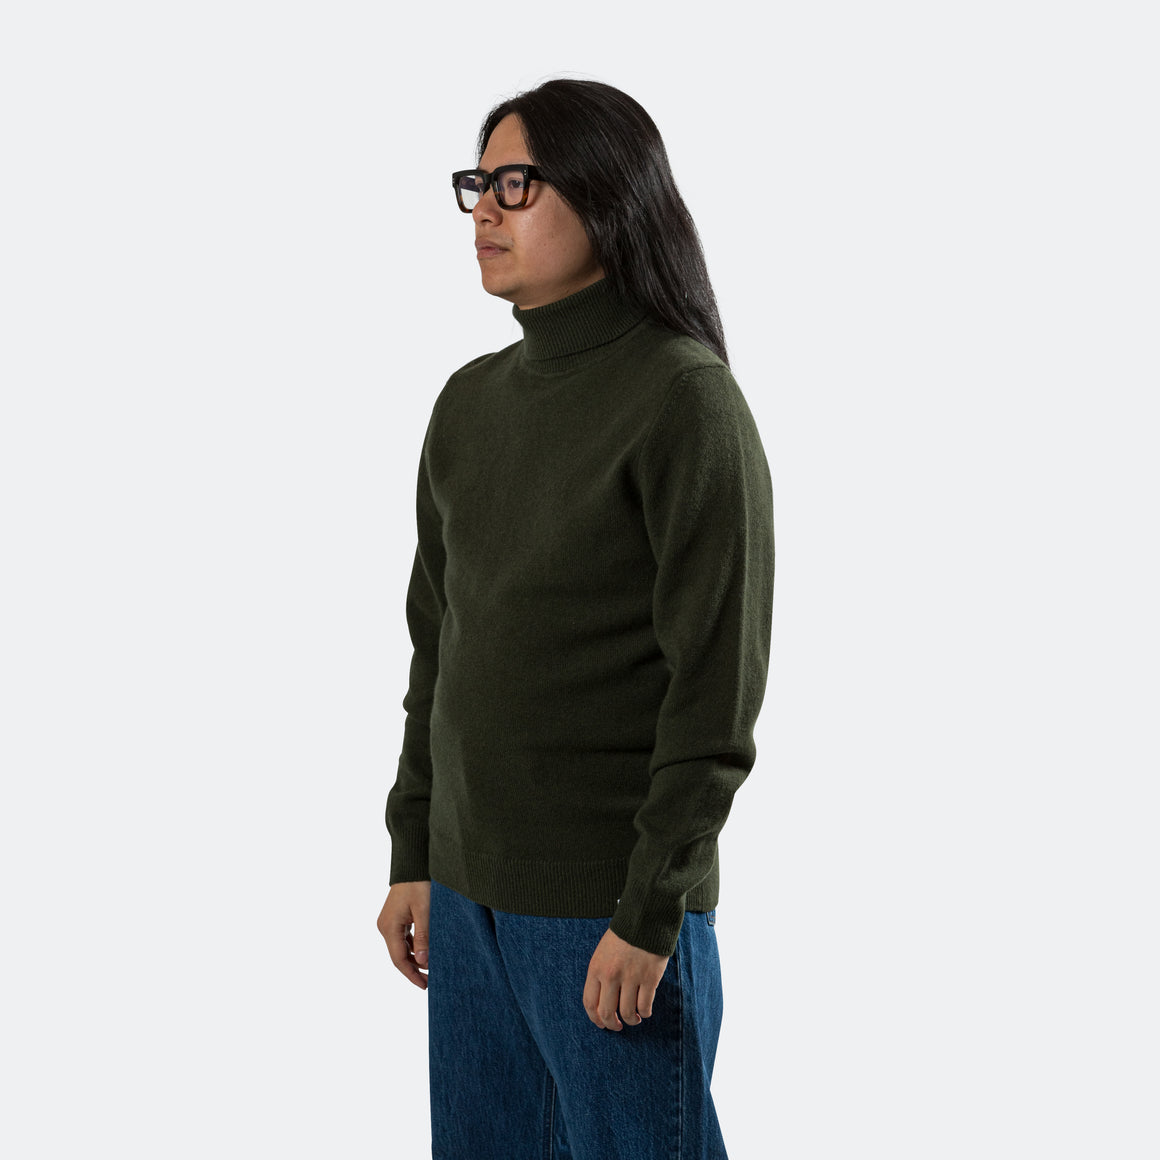 Norse Projects - Kirk Merino Lambswool Turtleneck - Army Green - UP THERE